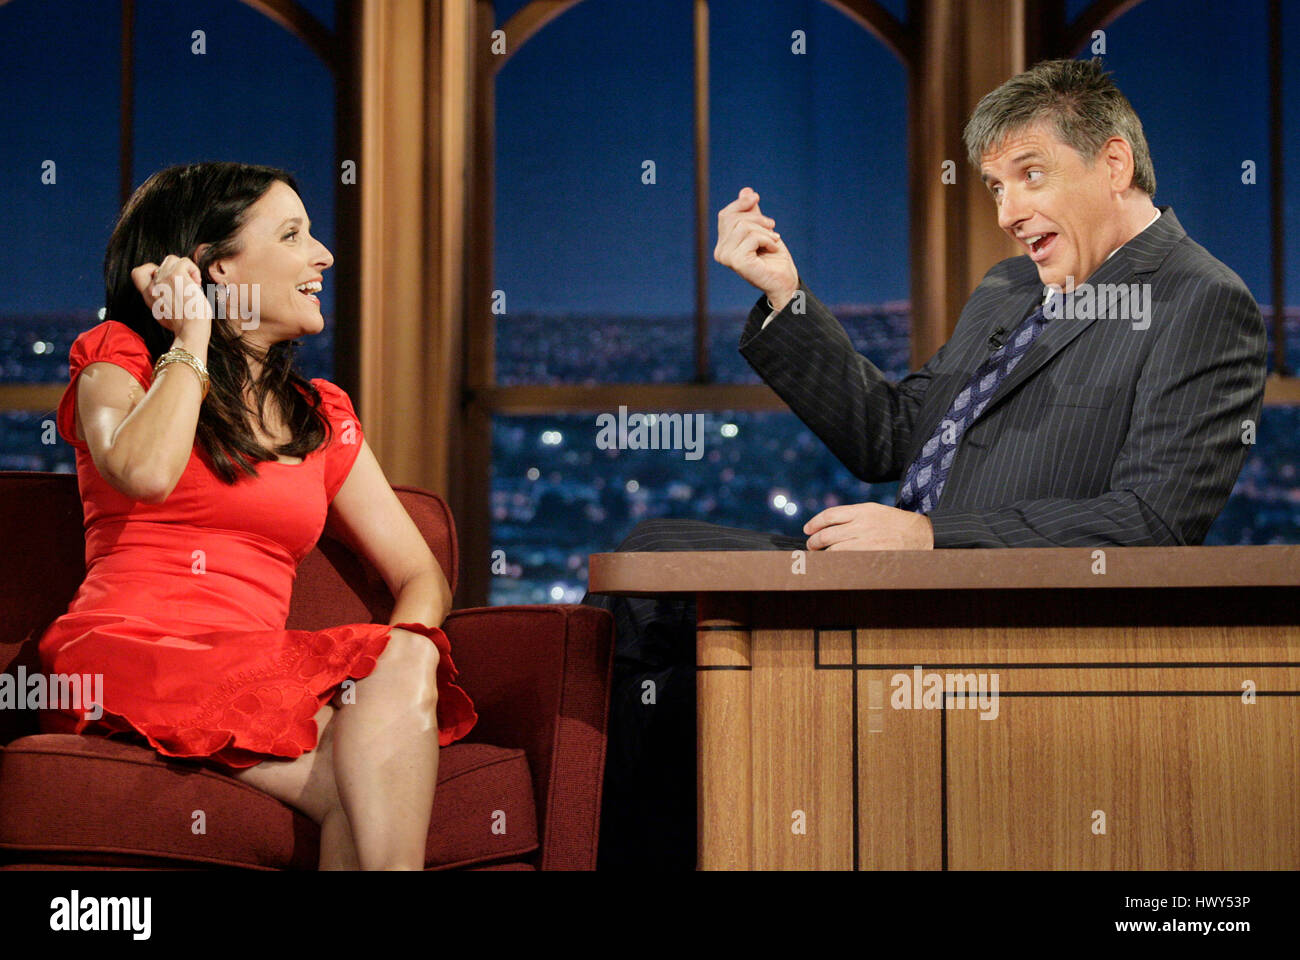 Host Craig Ferguson, right, interviews actress Julia Louis-Dreyfus during a segment of 'The Late Late Show with Craig Ferguson' at CBS Television City on June 2, 2008 in Los Angeles, California. Photo by Francis Specker Stock Photo